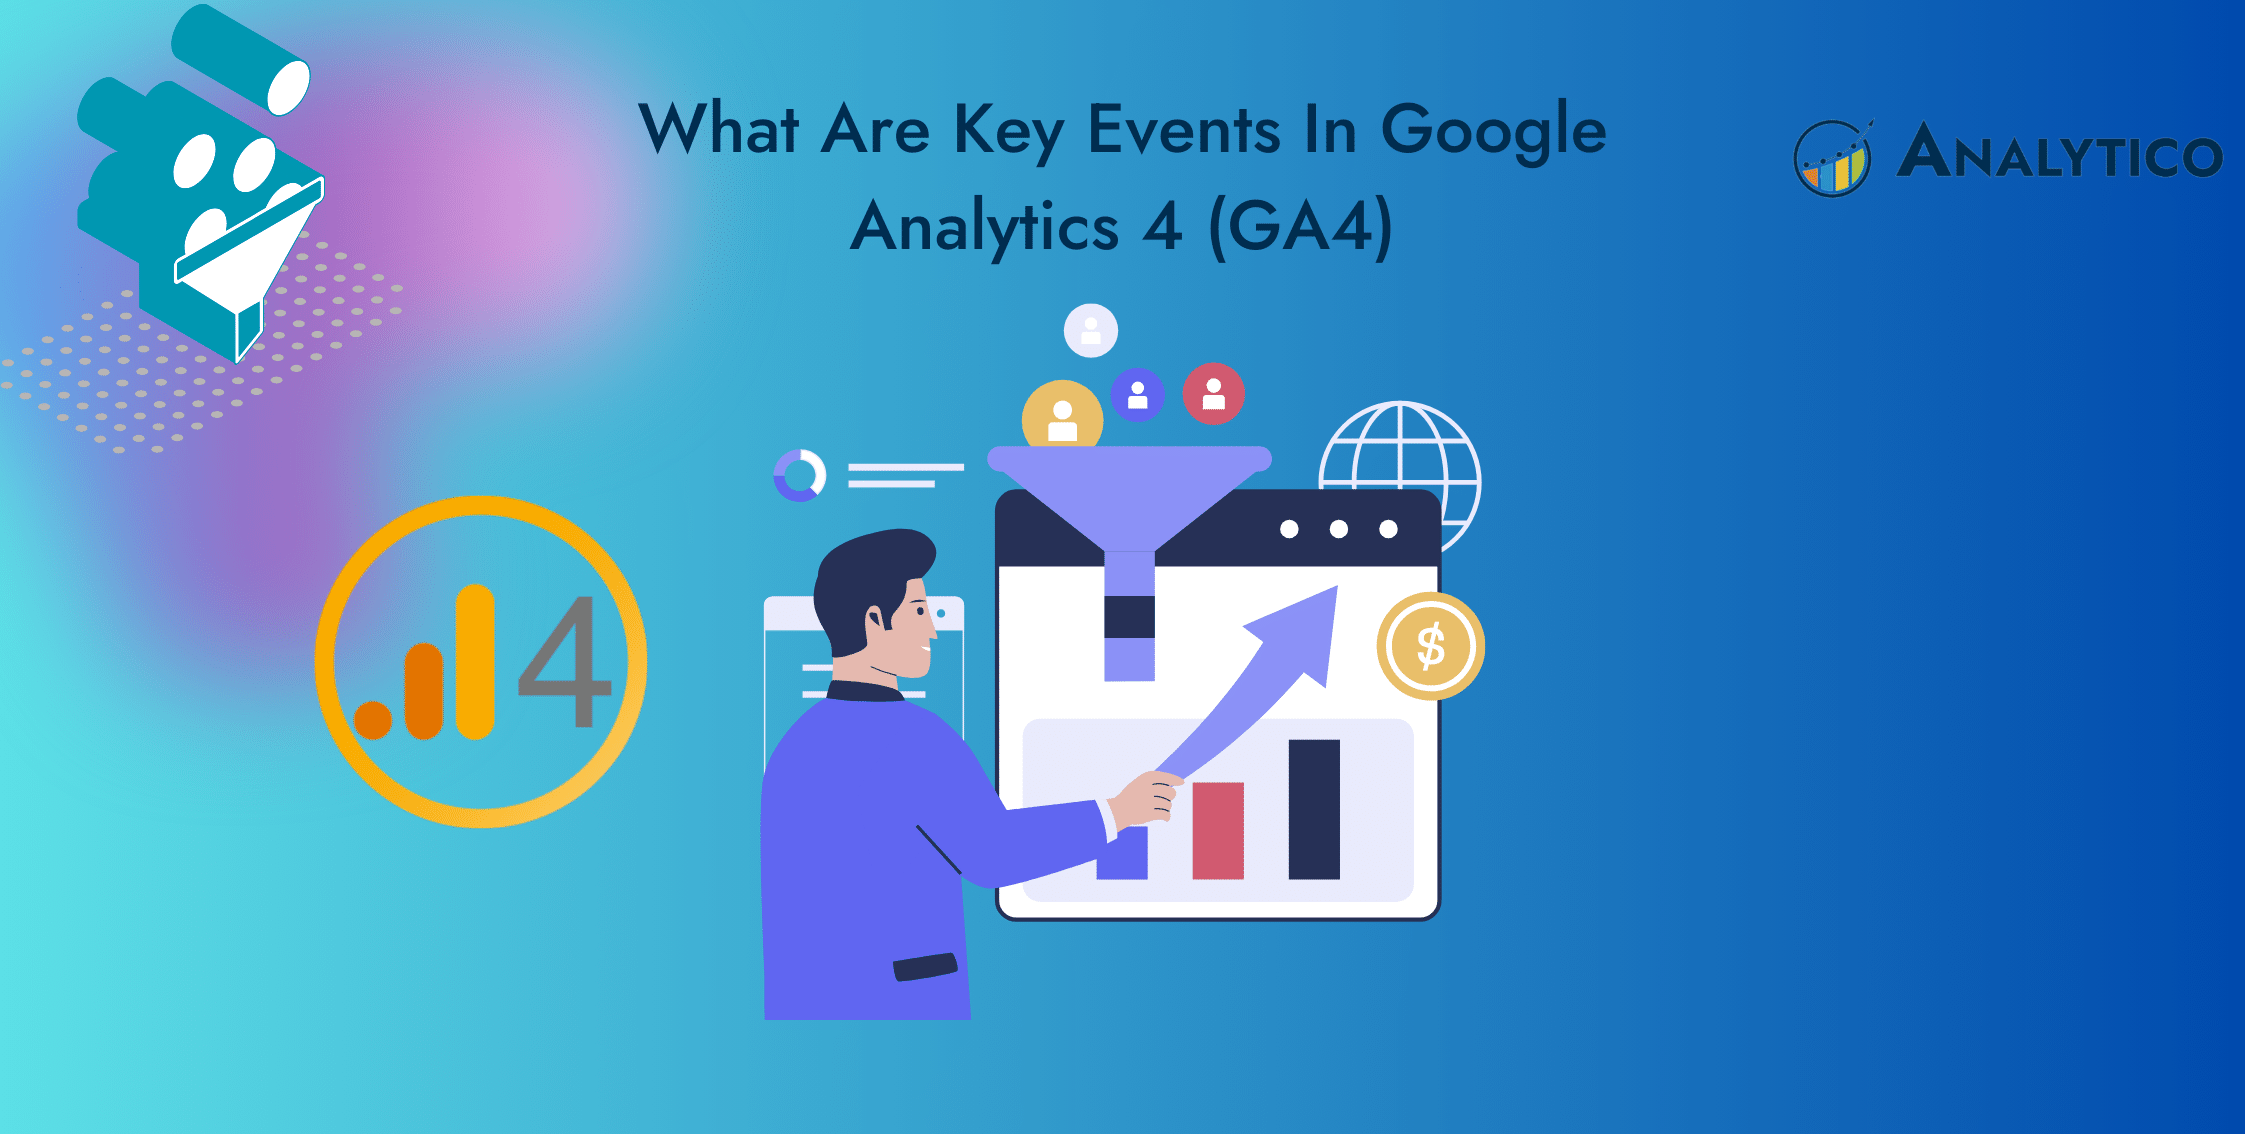 What are Key Events in Google Analytics 4 (GA4)?